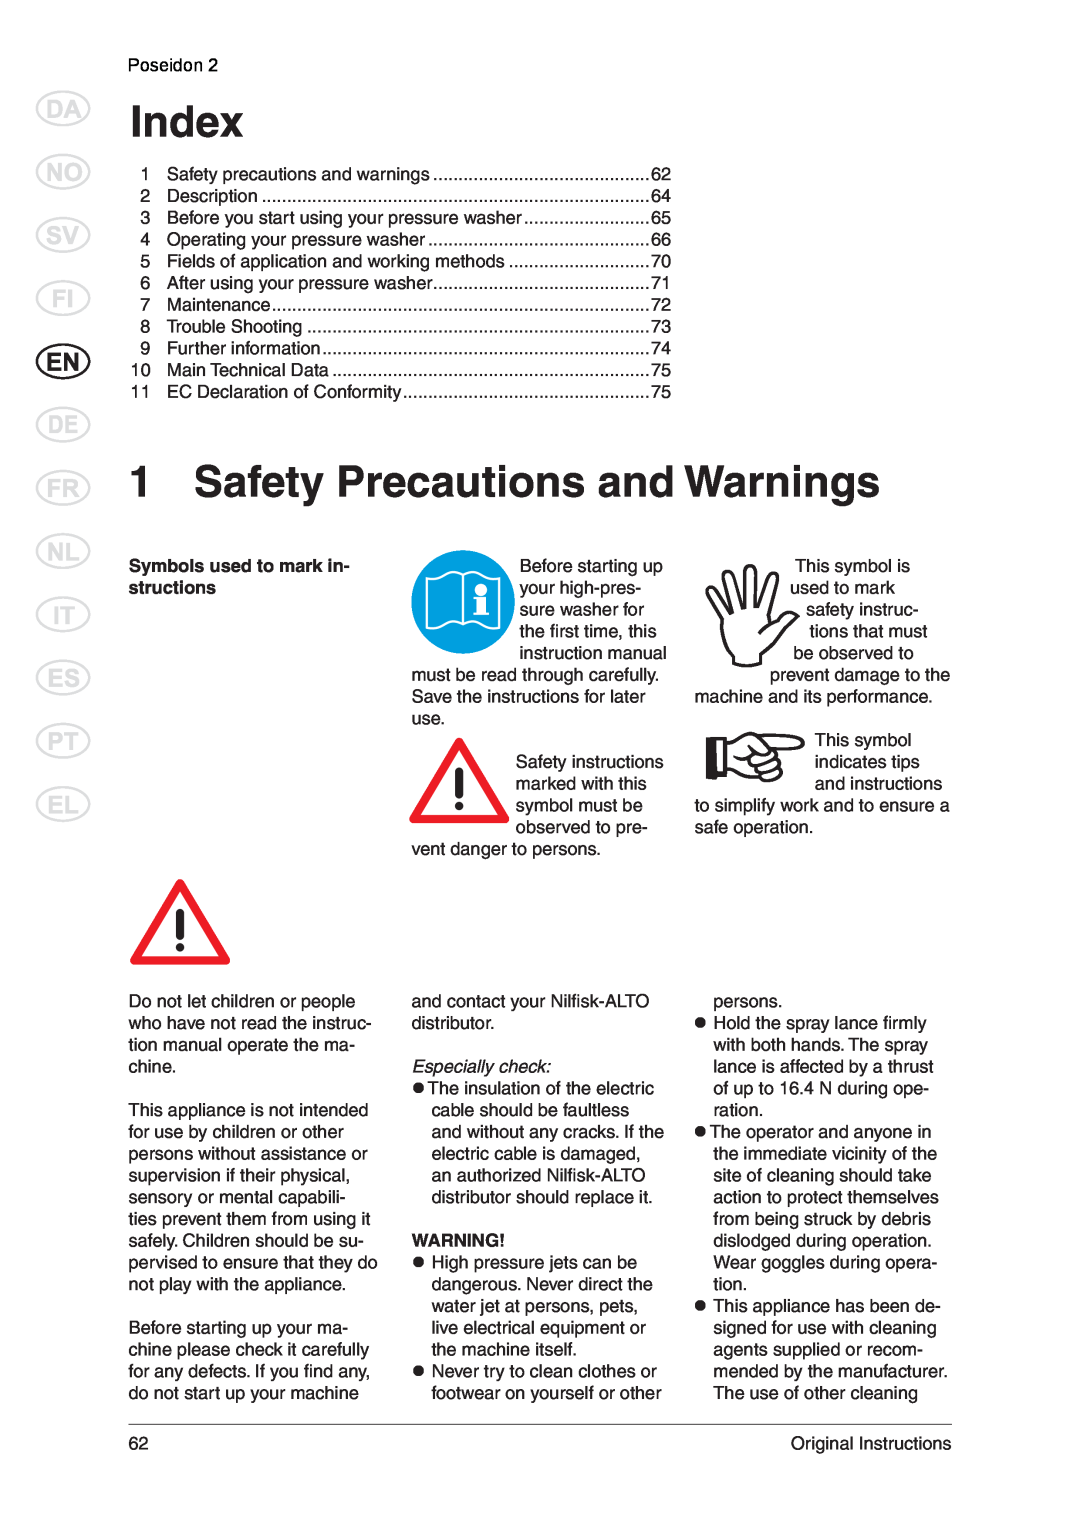 Nilfisk-ALTO 2 manual Index, Safety Precautions and Warnings, Poseidon, Symbols used to mark in, structions 